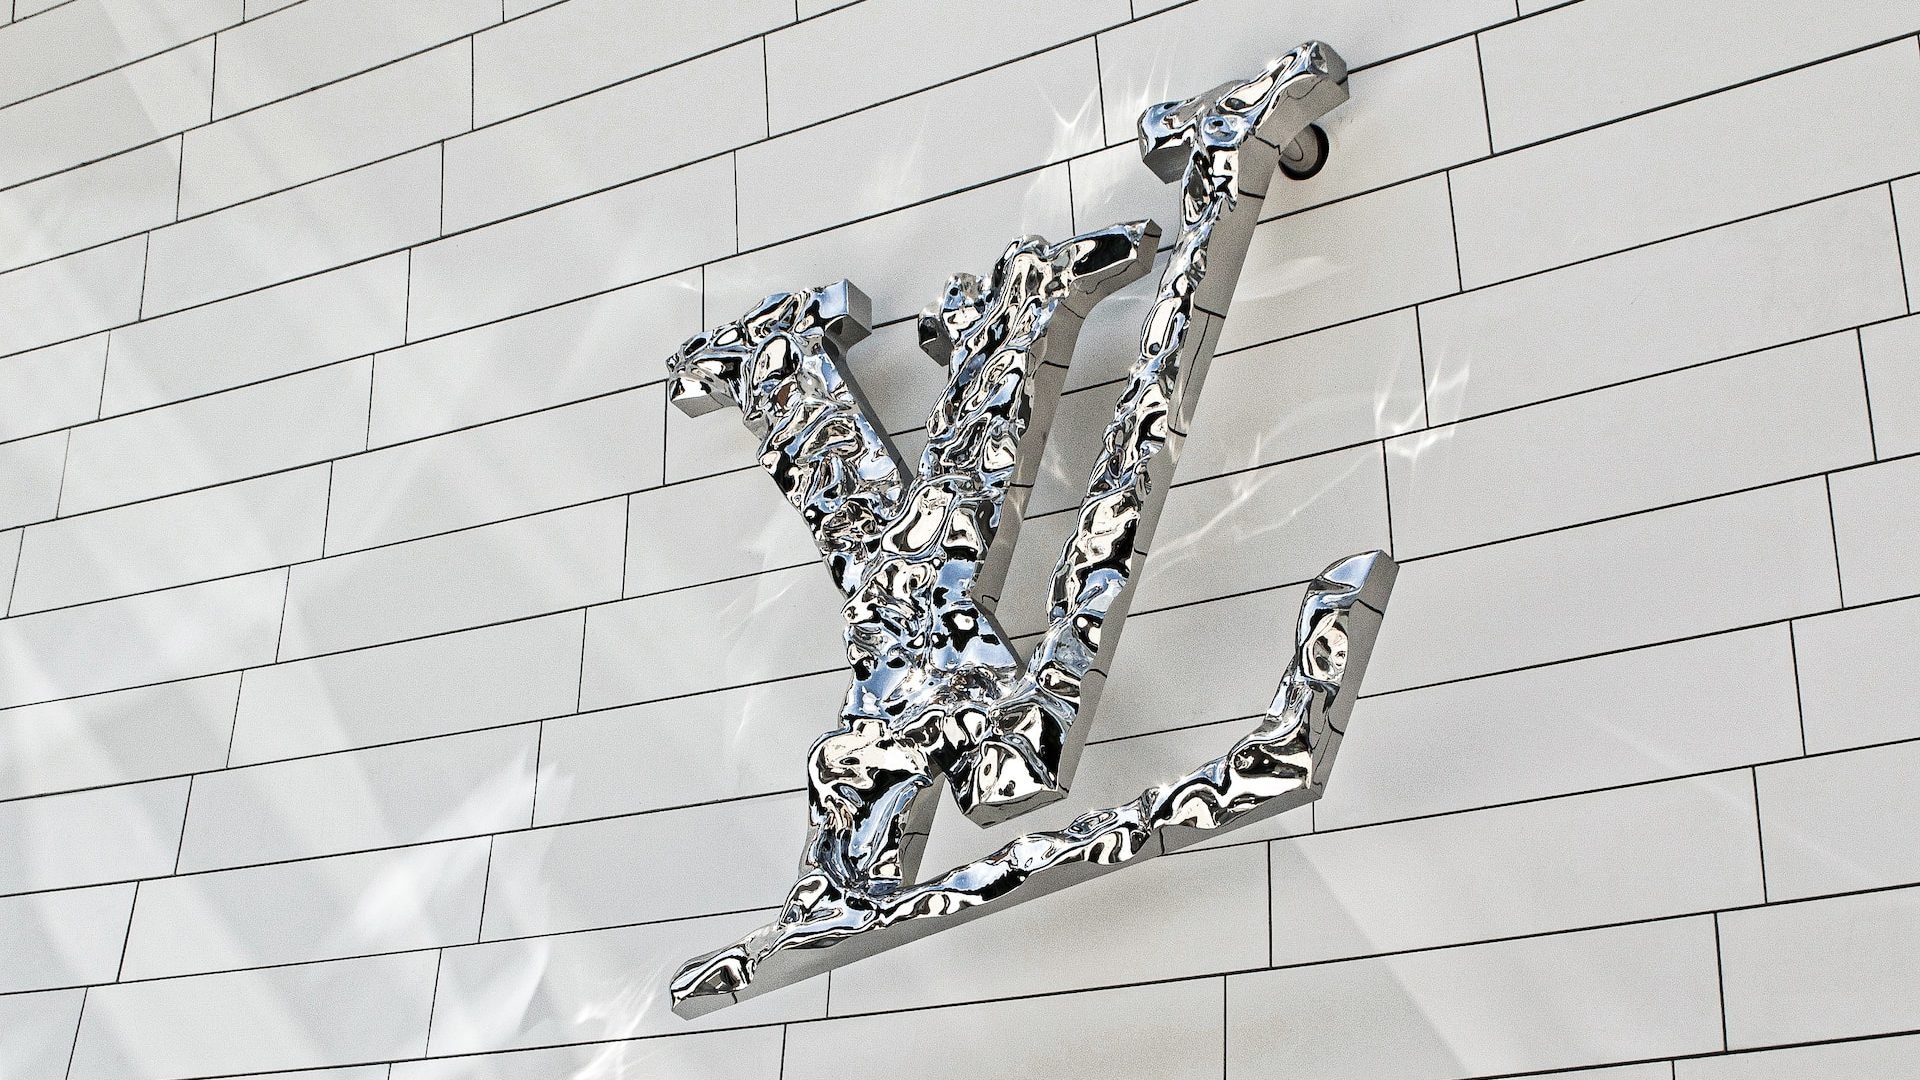 The white facade features an LV logo design representing the French fashion luxury company Louis Vuitton.